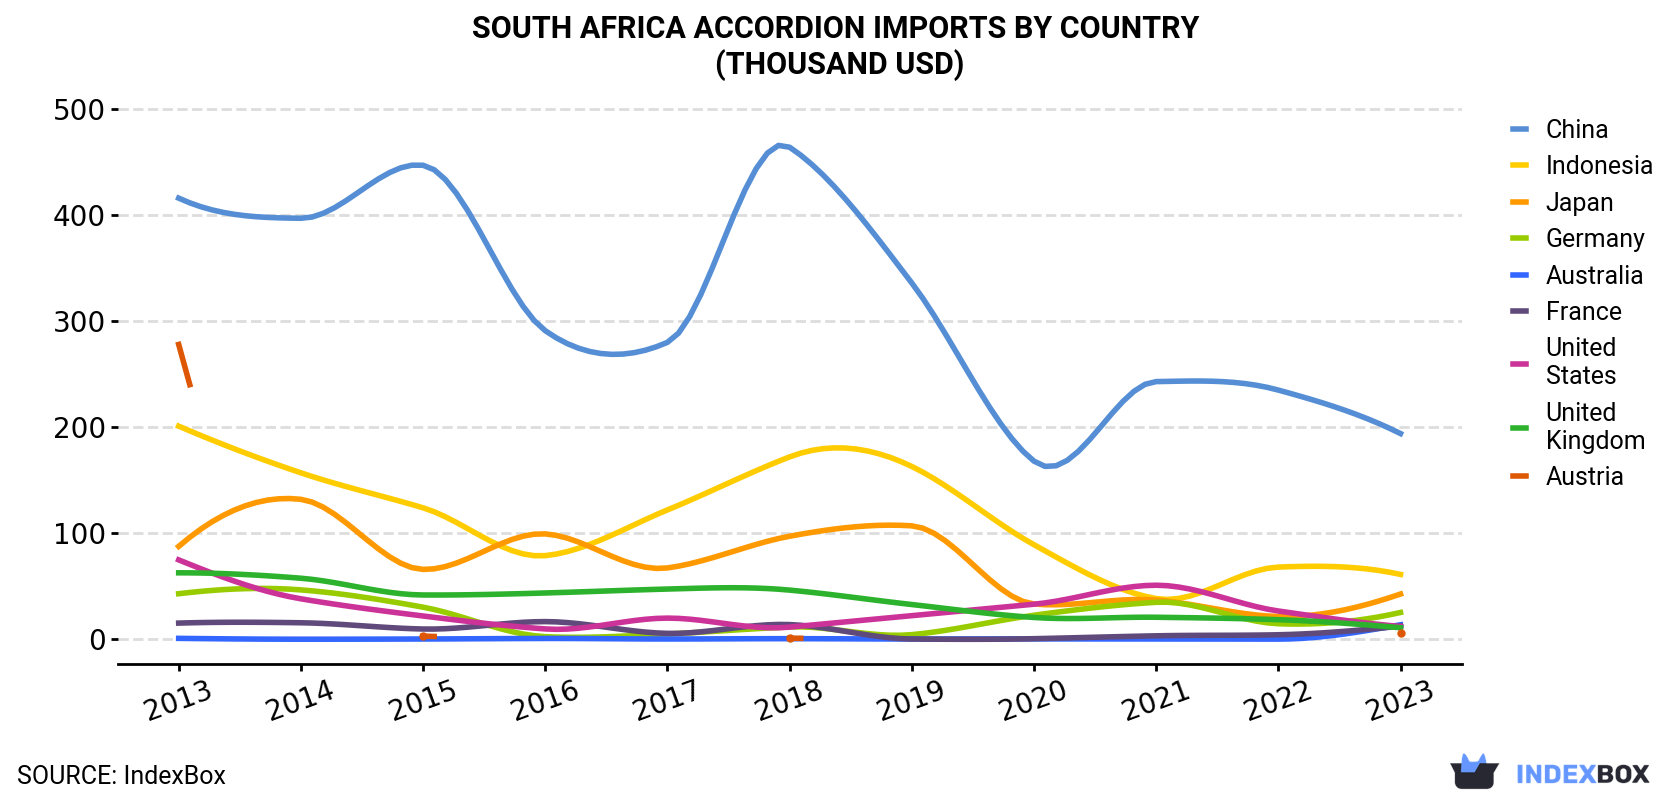 South Africa Accordion Imports By Country (Thousand USD)